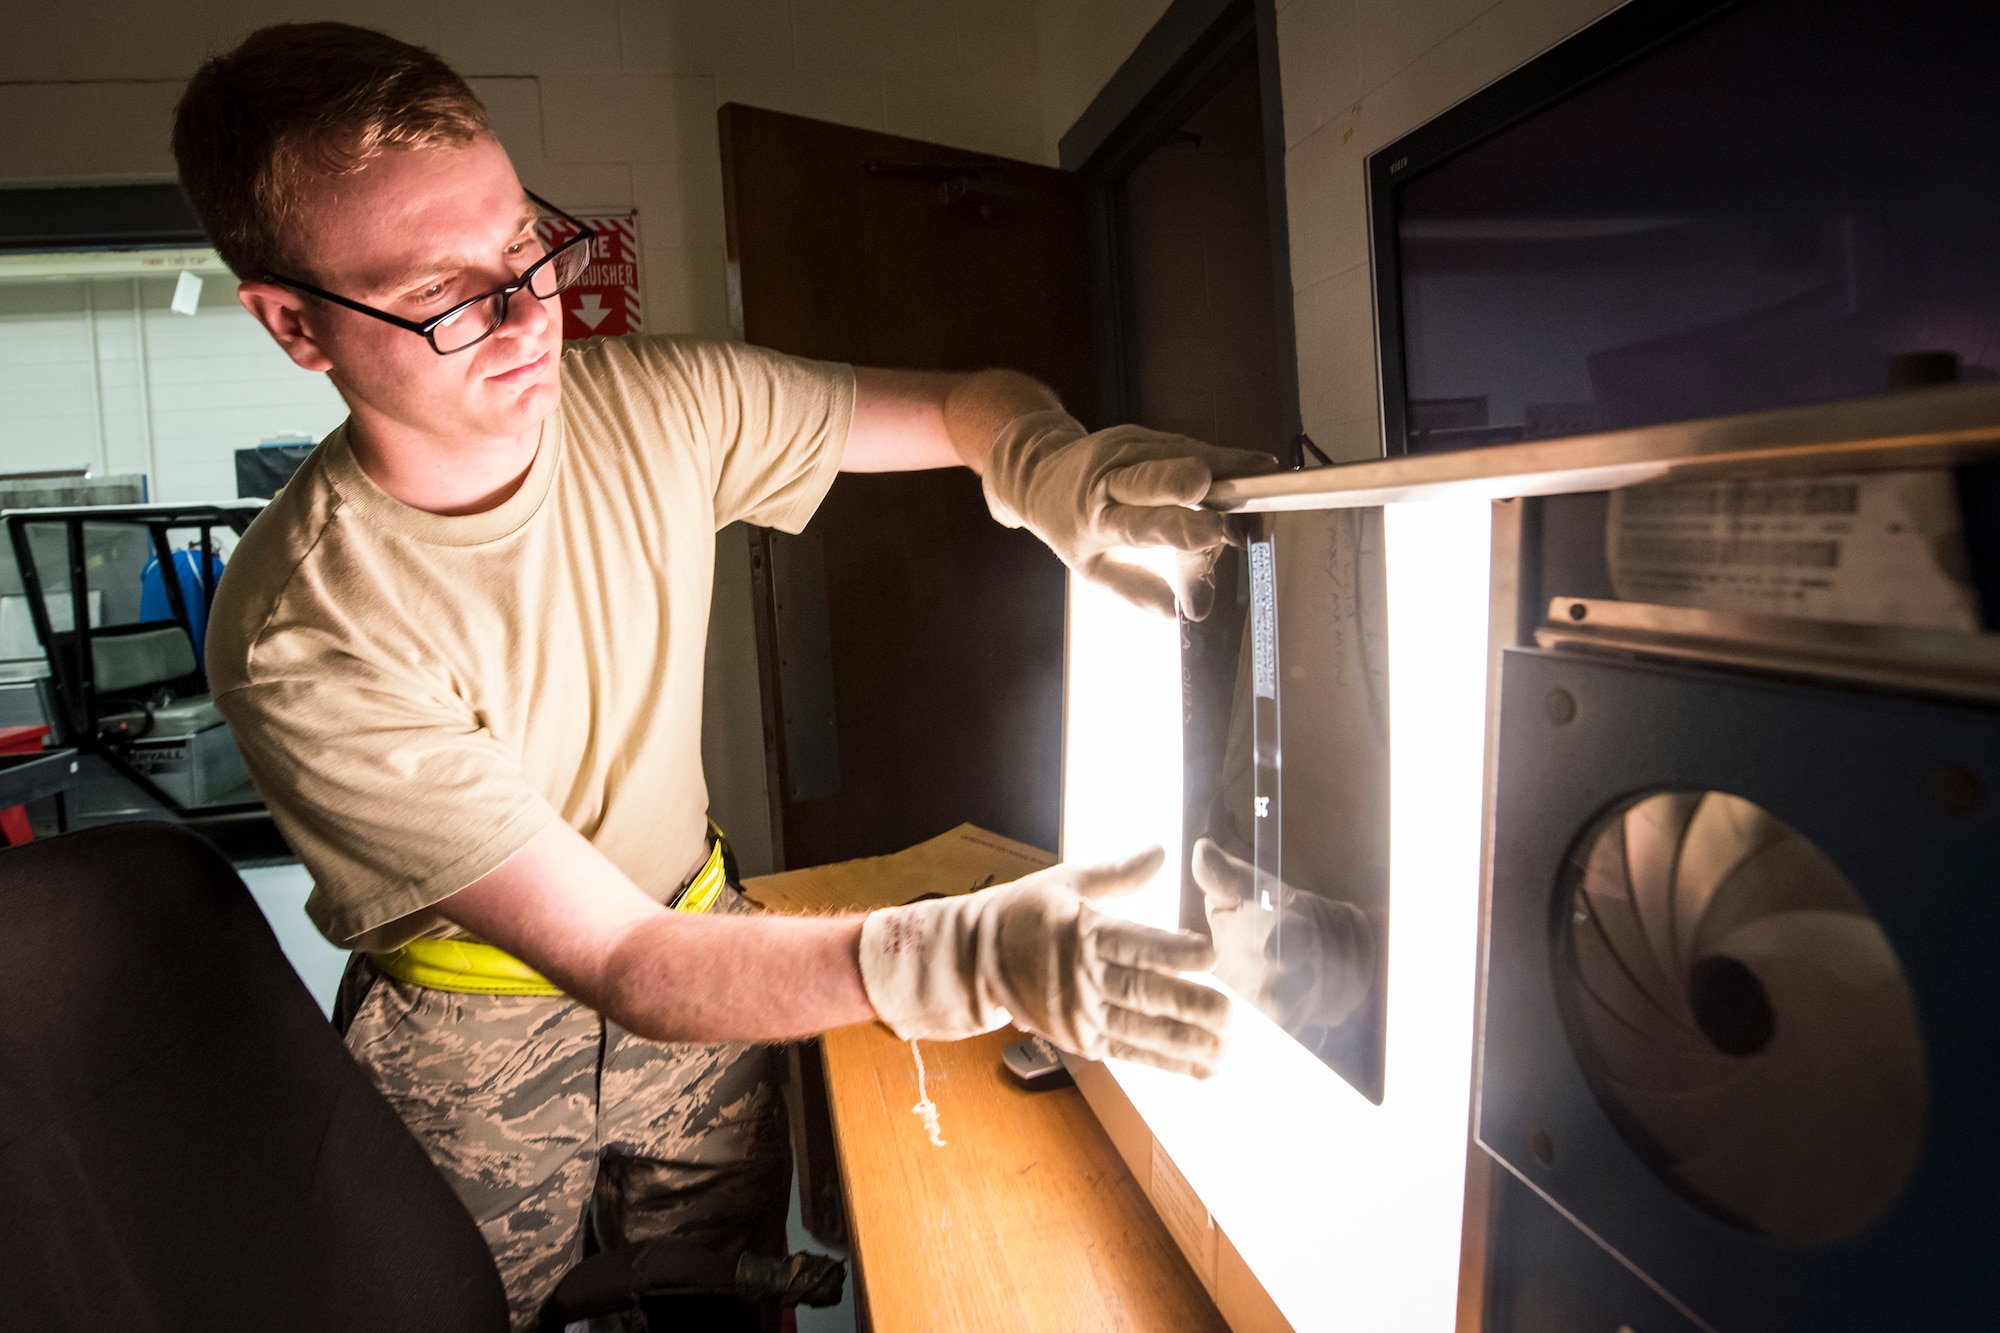 Senior Airman Austin Aldridge, 23d Maintenance Squadron non-destructive inspection (NDI) specialist, aligns film on an X-ray machine, May 2, 2018, at Moody Air Force Base, Ga. NDI technicians use various methods to complete these inspections such as X-ray, florescent dye penetrant, oil analysis and ultrasonic scanning to examine and inspect numerous aircraft parts and components to ensure that they are in usable condition. (U.S. Air Force photo by Airman 1st Class Eugene Oliver)